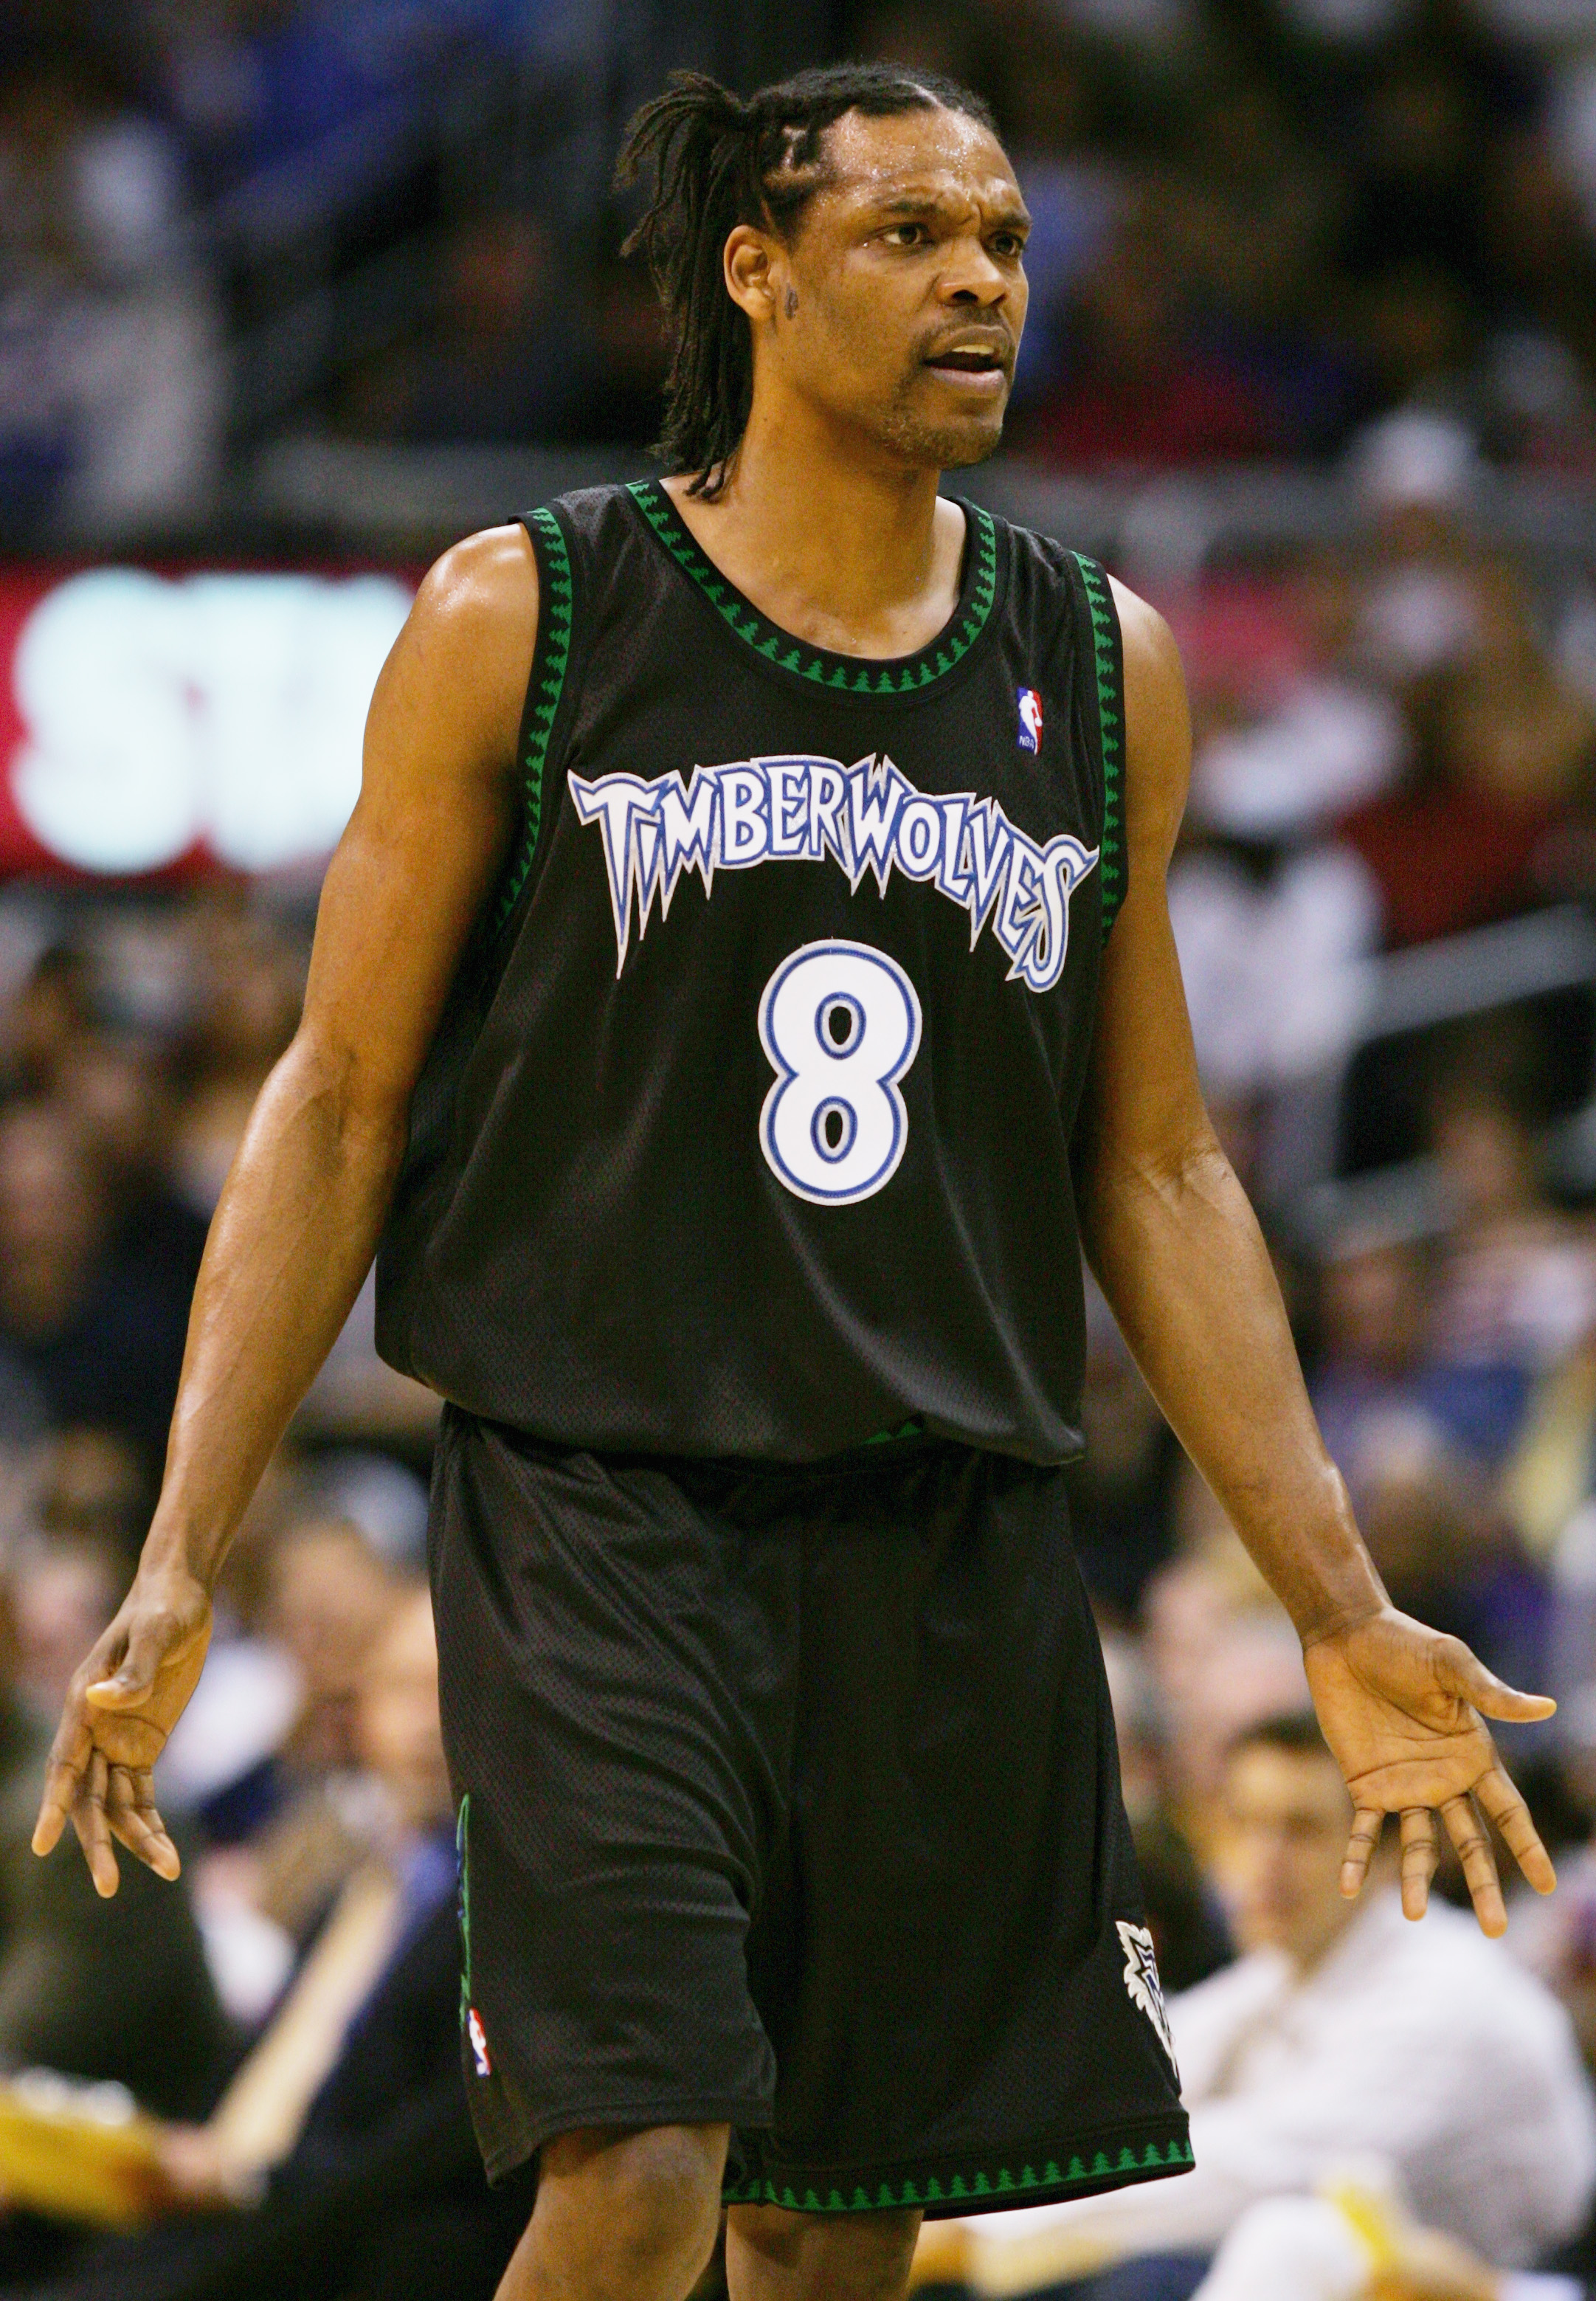 LOS ANGELES - MARCH 31:  Latrell Sprewell #8 of the Minnesota Timberwolves looks on during a break in action against the Los Angeles Lakers on March 31, 2005 at Staples Center in Los Angeles, California. NOTE TO USER: User expressly acknowledges and agree